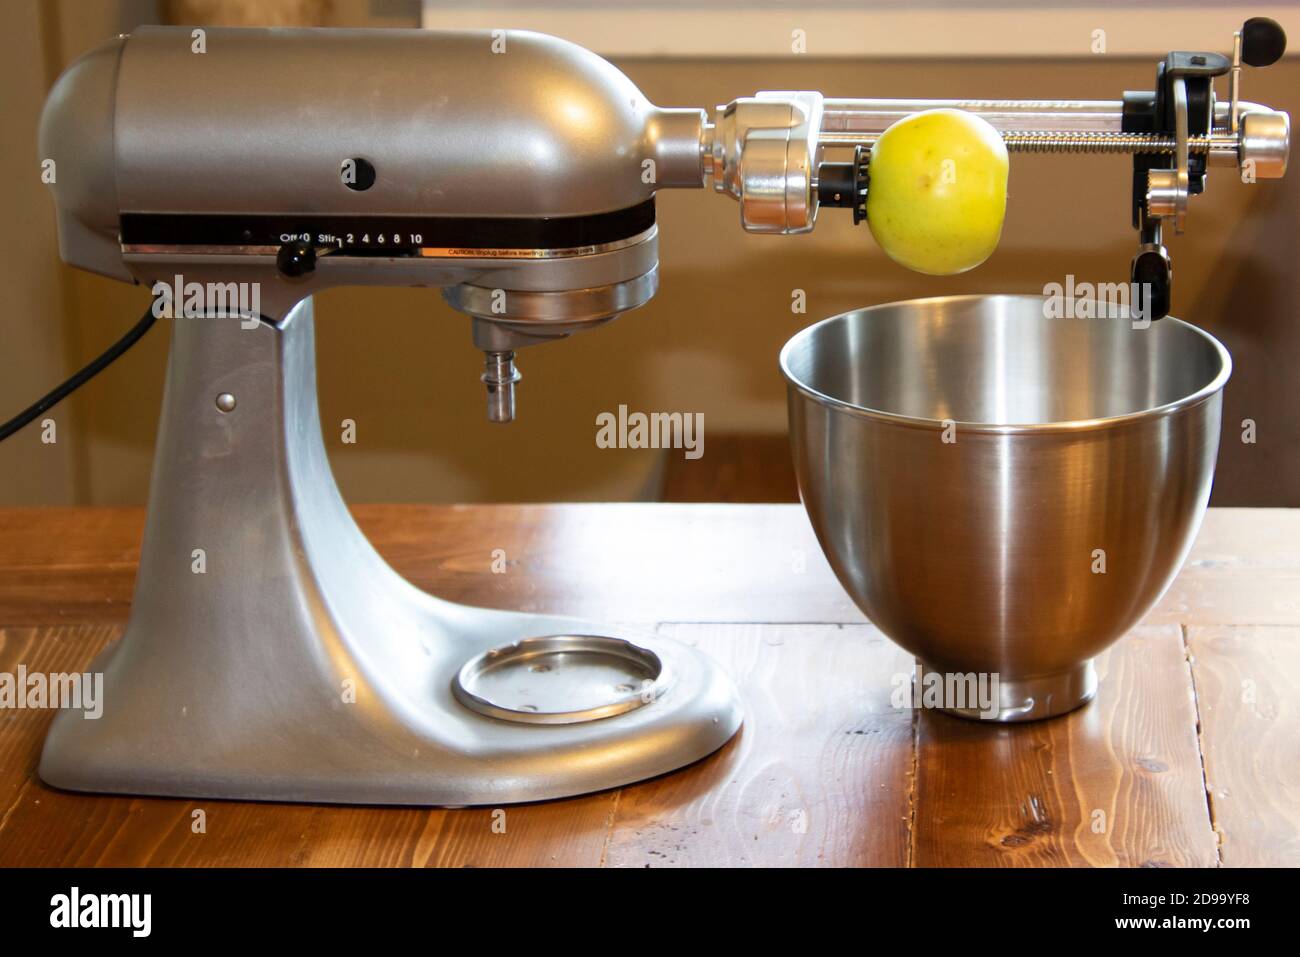 https://c8.alamy.com/comp/2D99YF8/a-mixing-stand-with-a-peeler-attachment-sitting-on-a-wooden-table-with-a-yellow-apple-getting-ready-to-be-peeled-2D99YF8.jpg